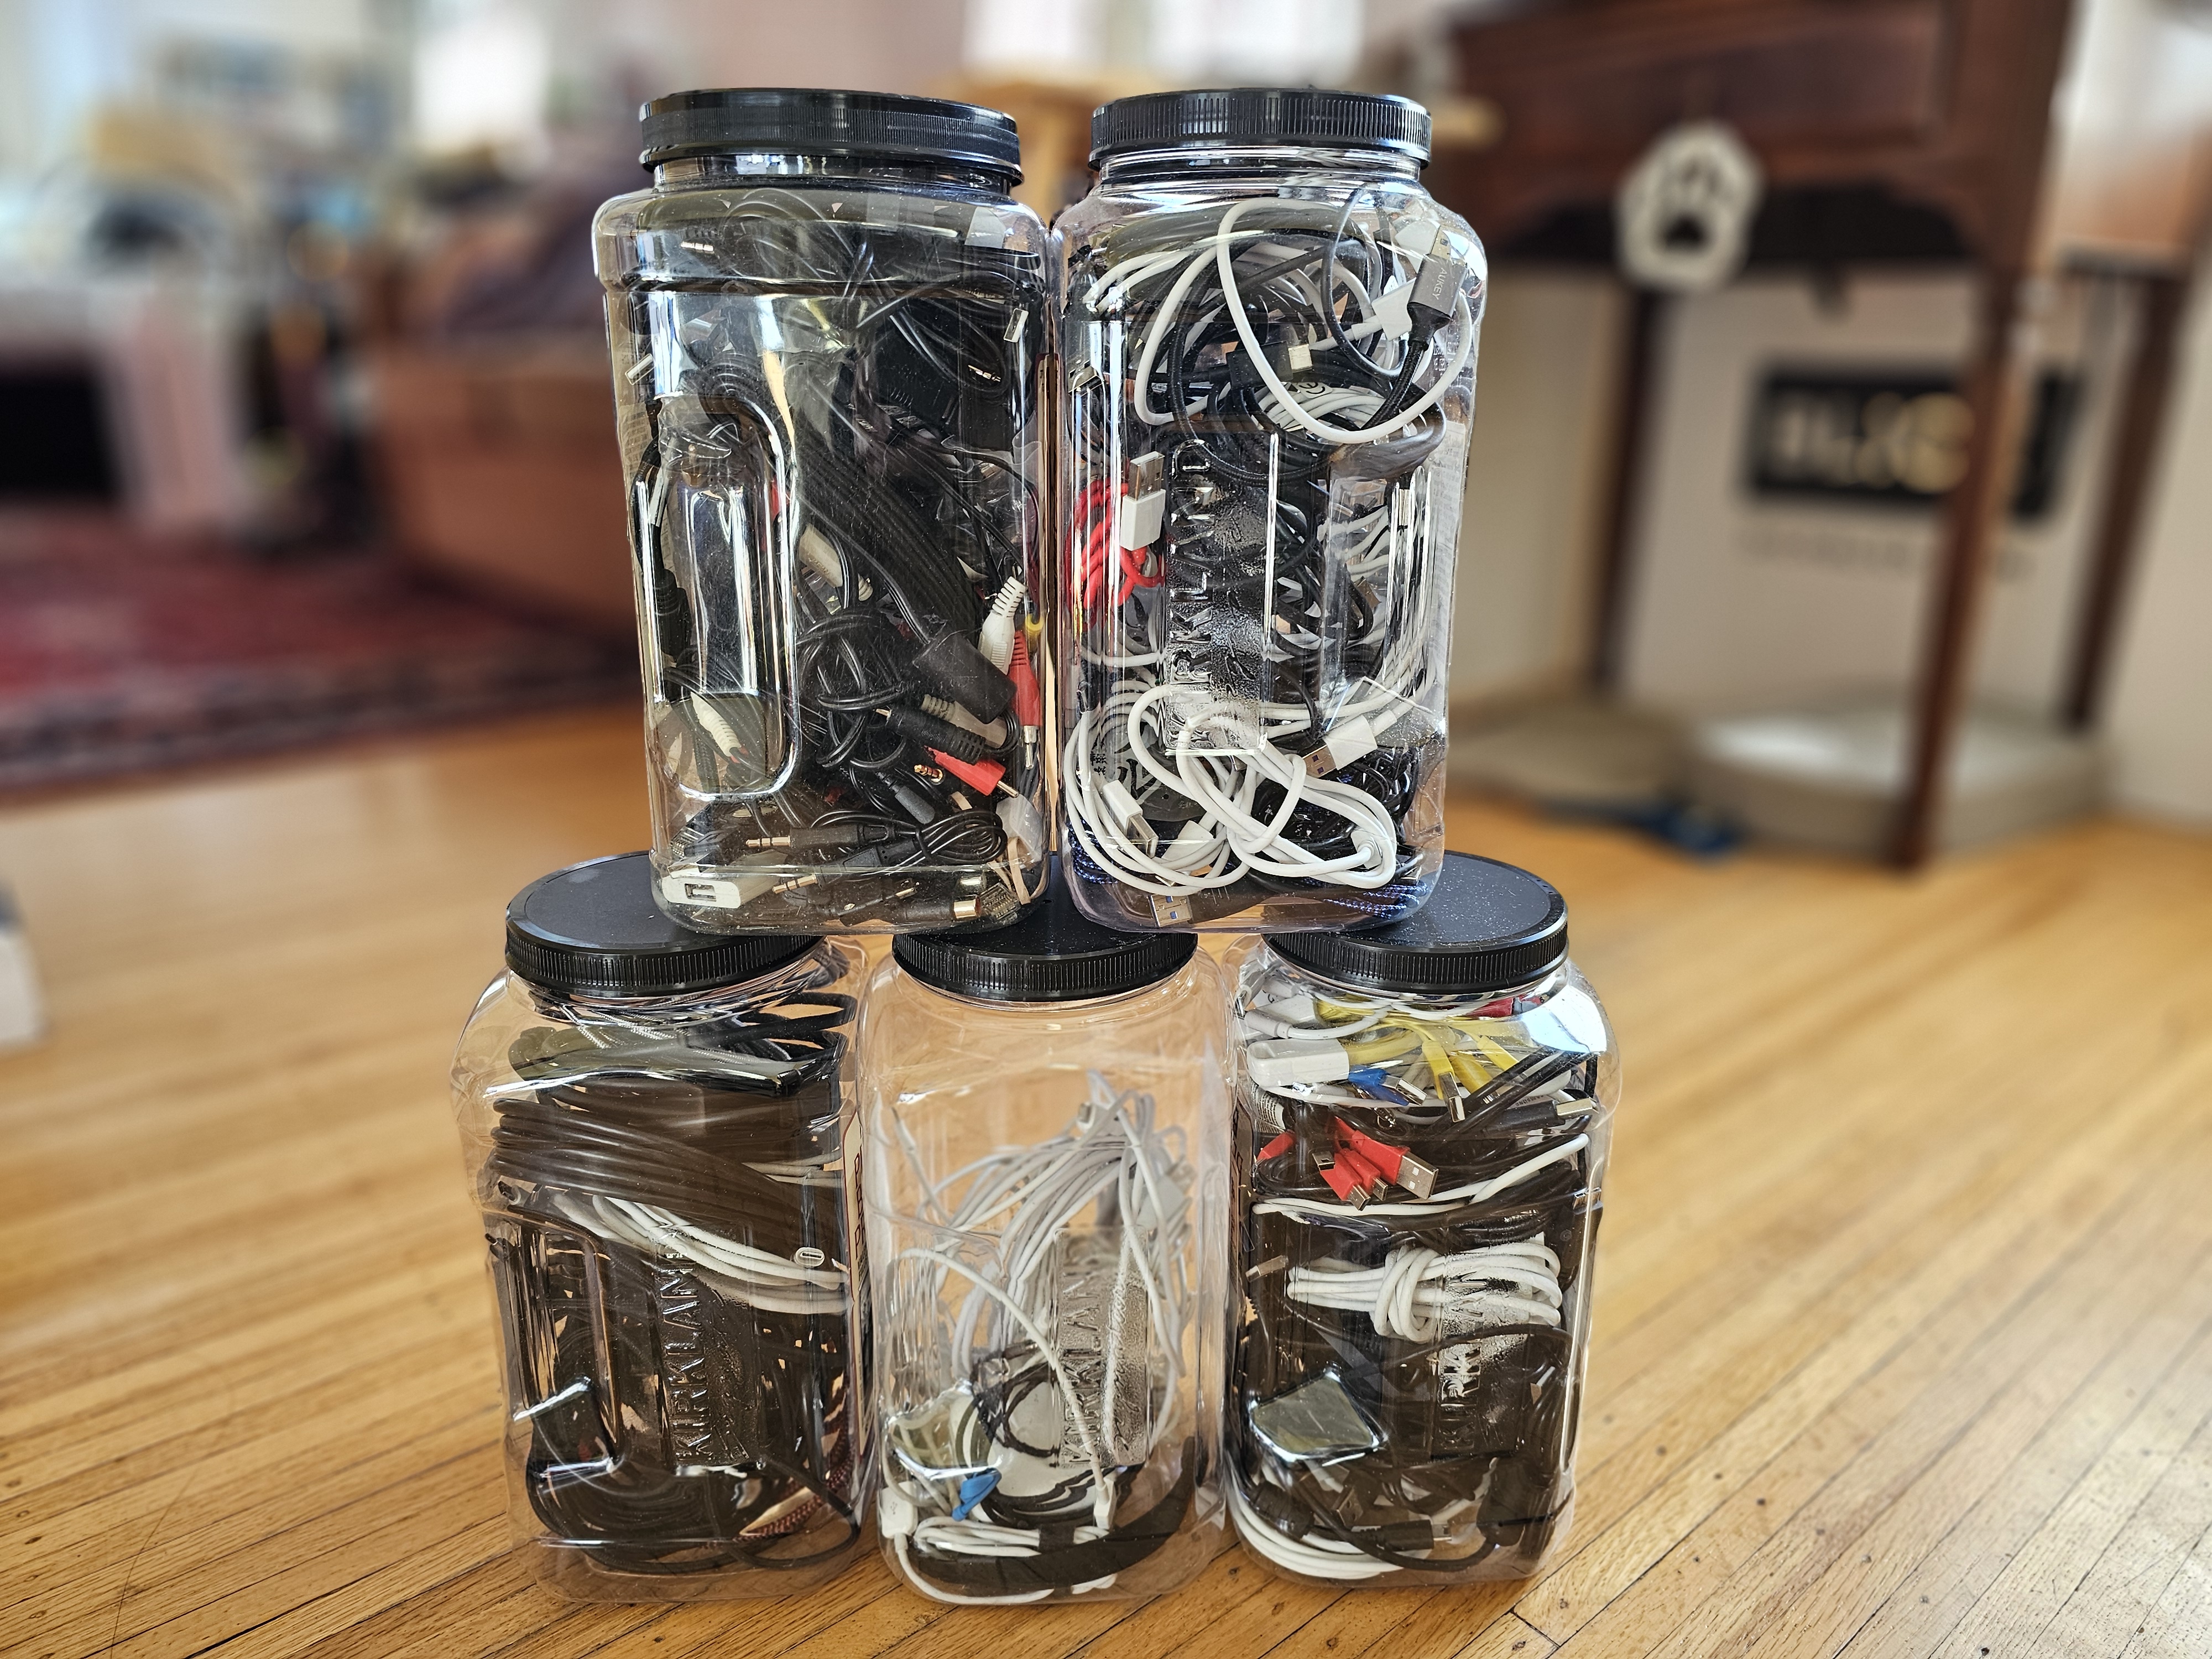 Jars of cables